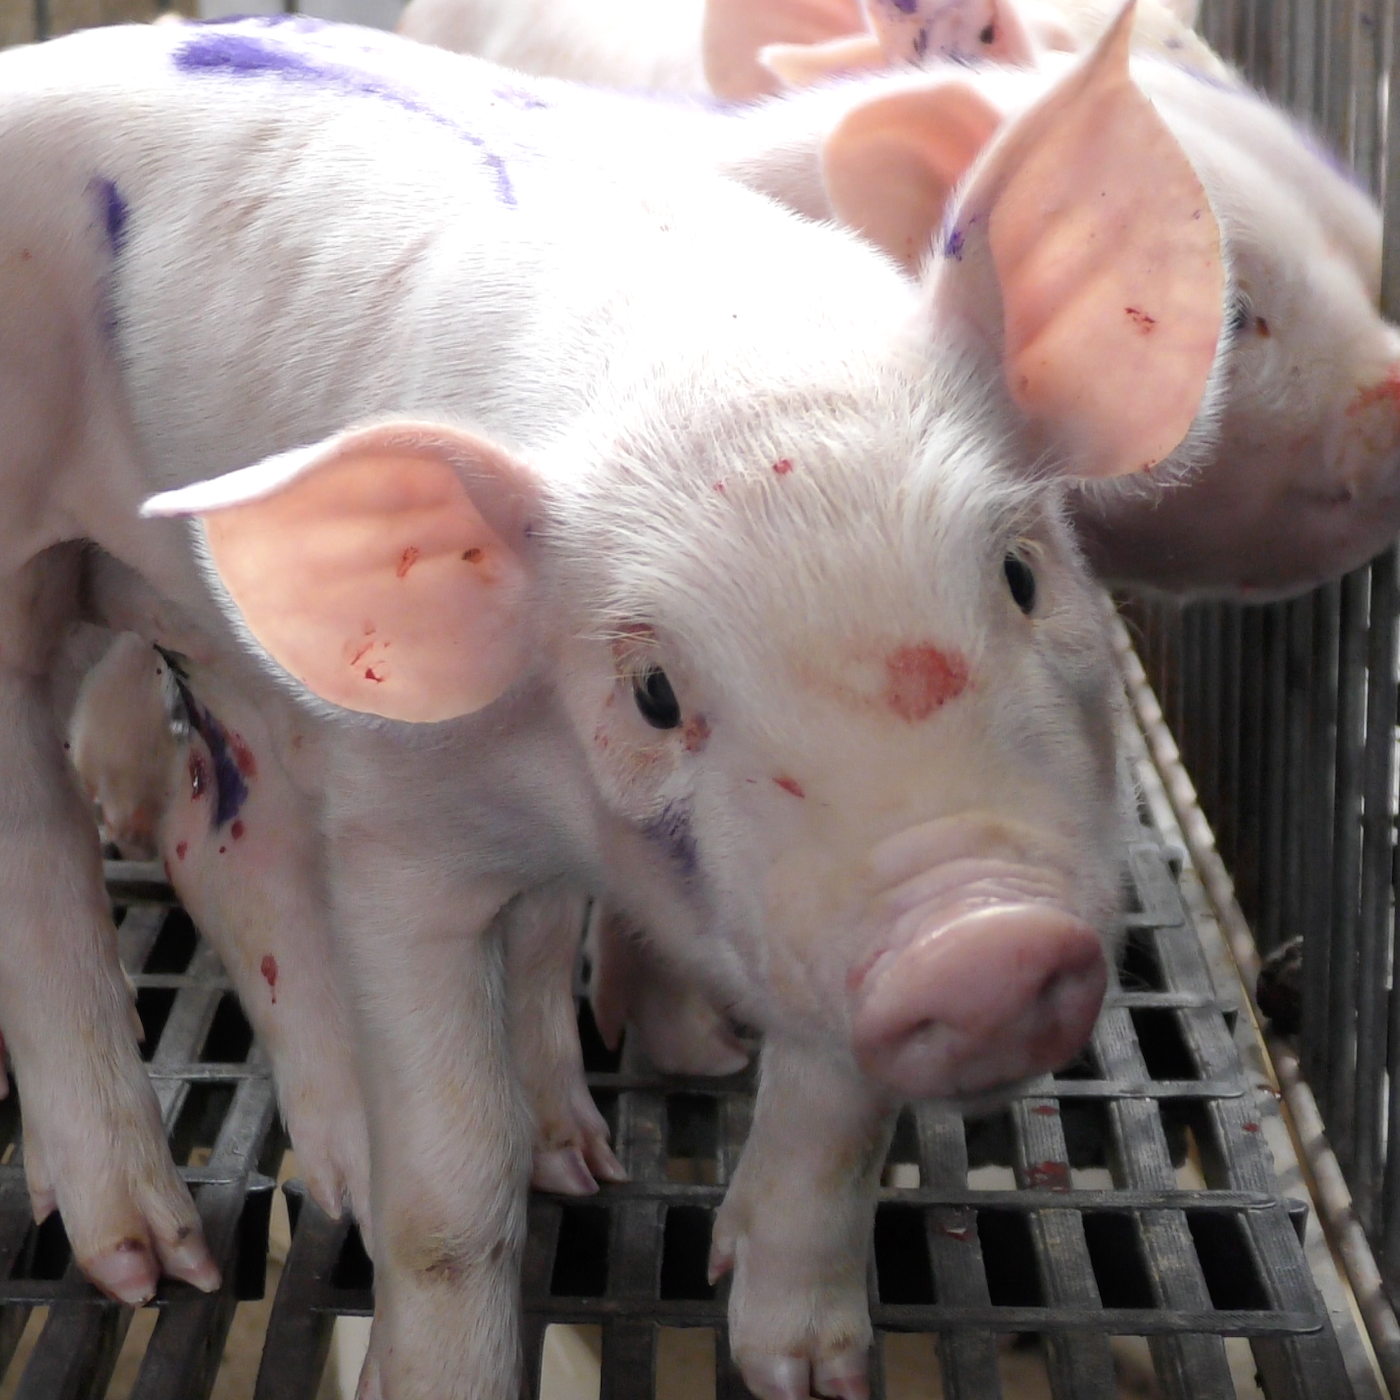 Animal Cruelty and Mutilations Found on Pig Farms in Mexico